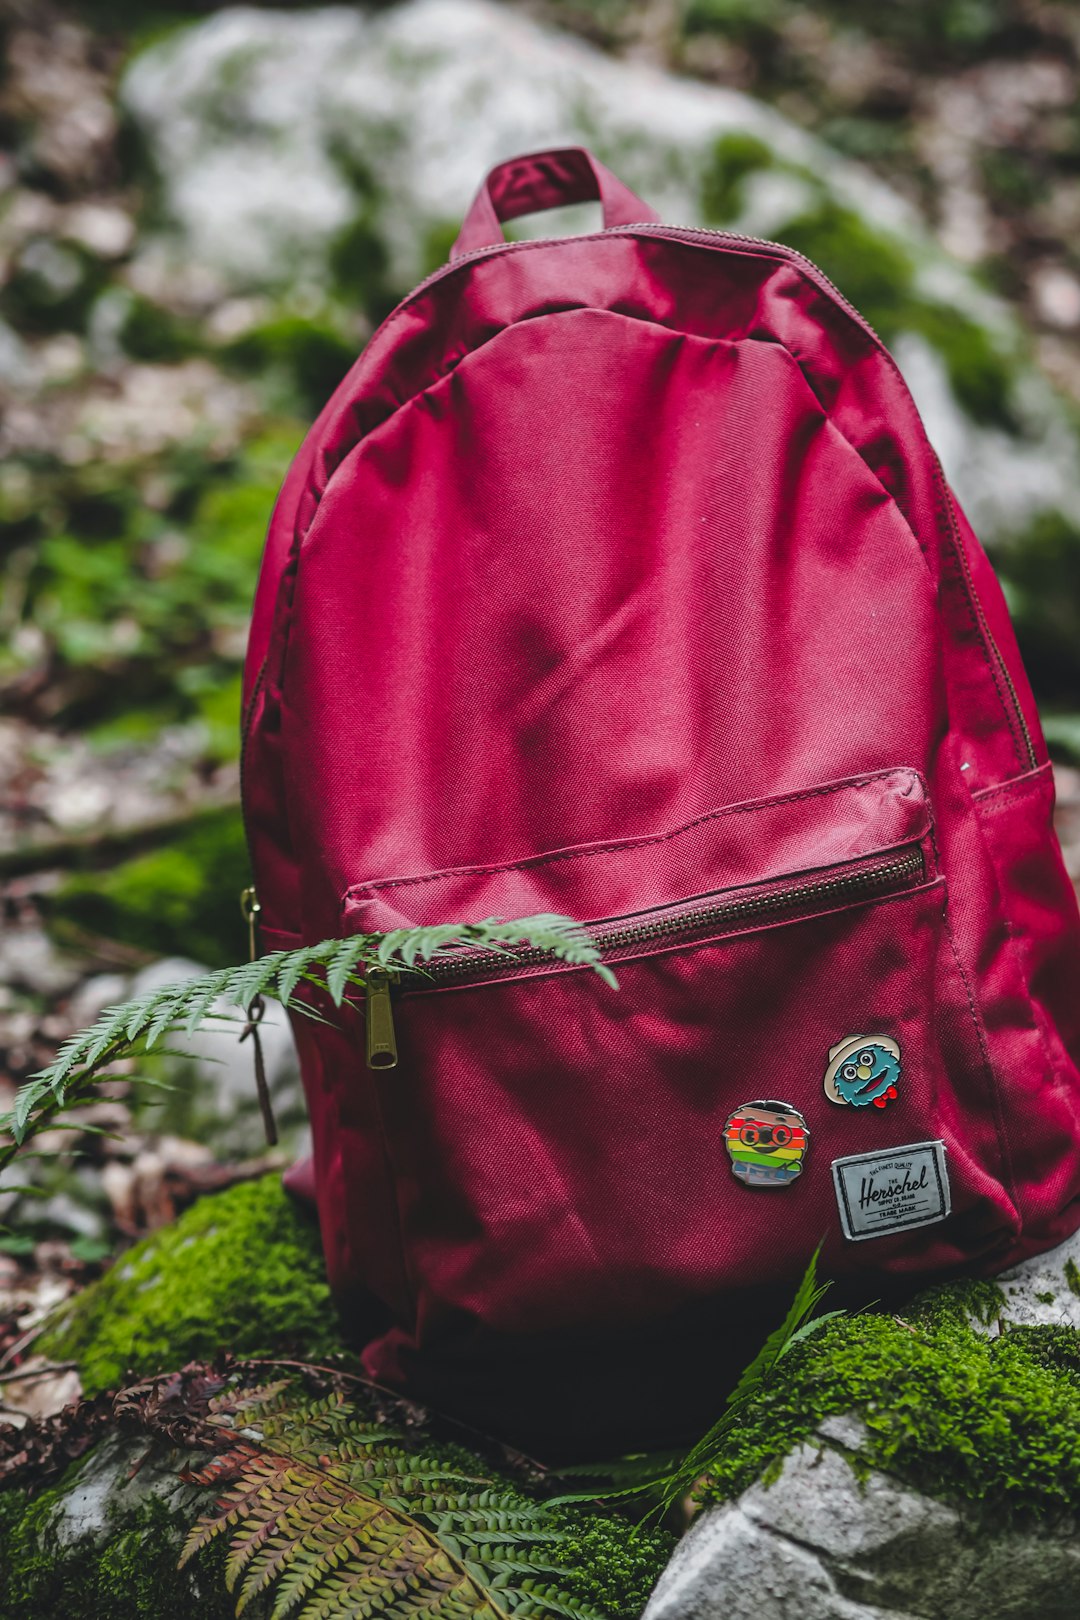 red backpack on green grass